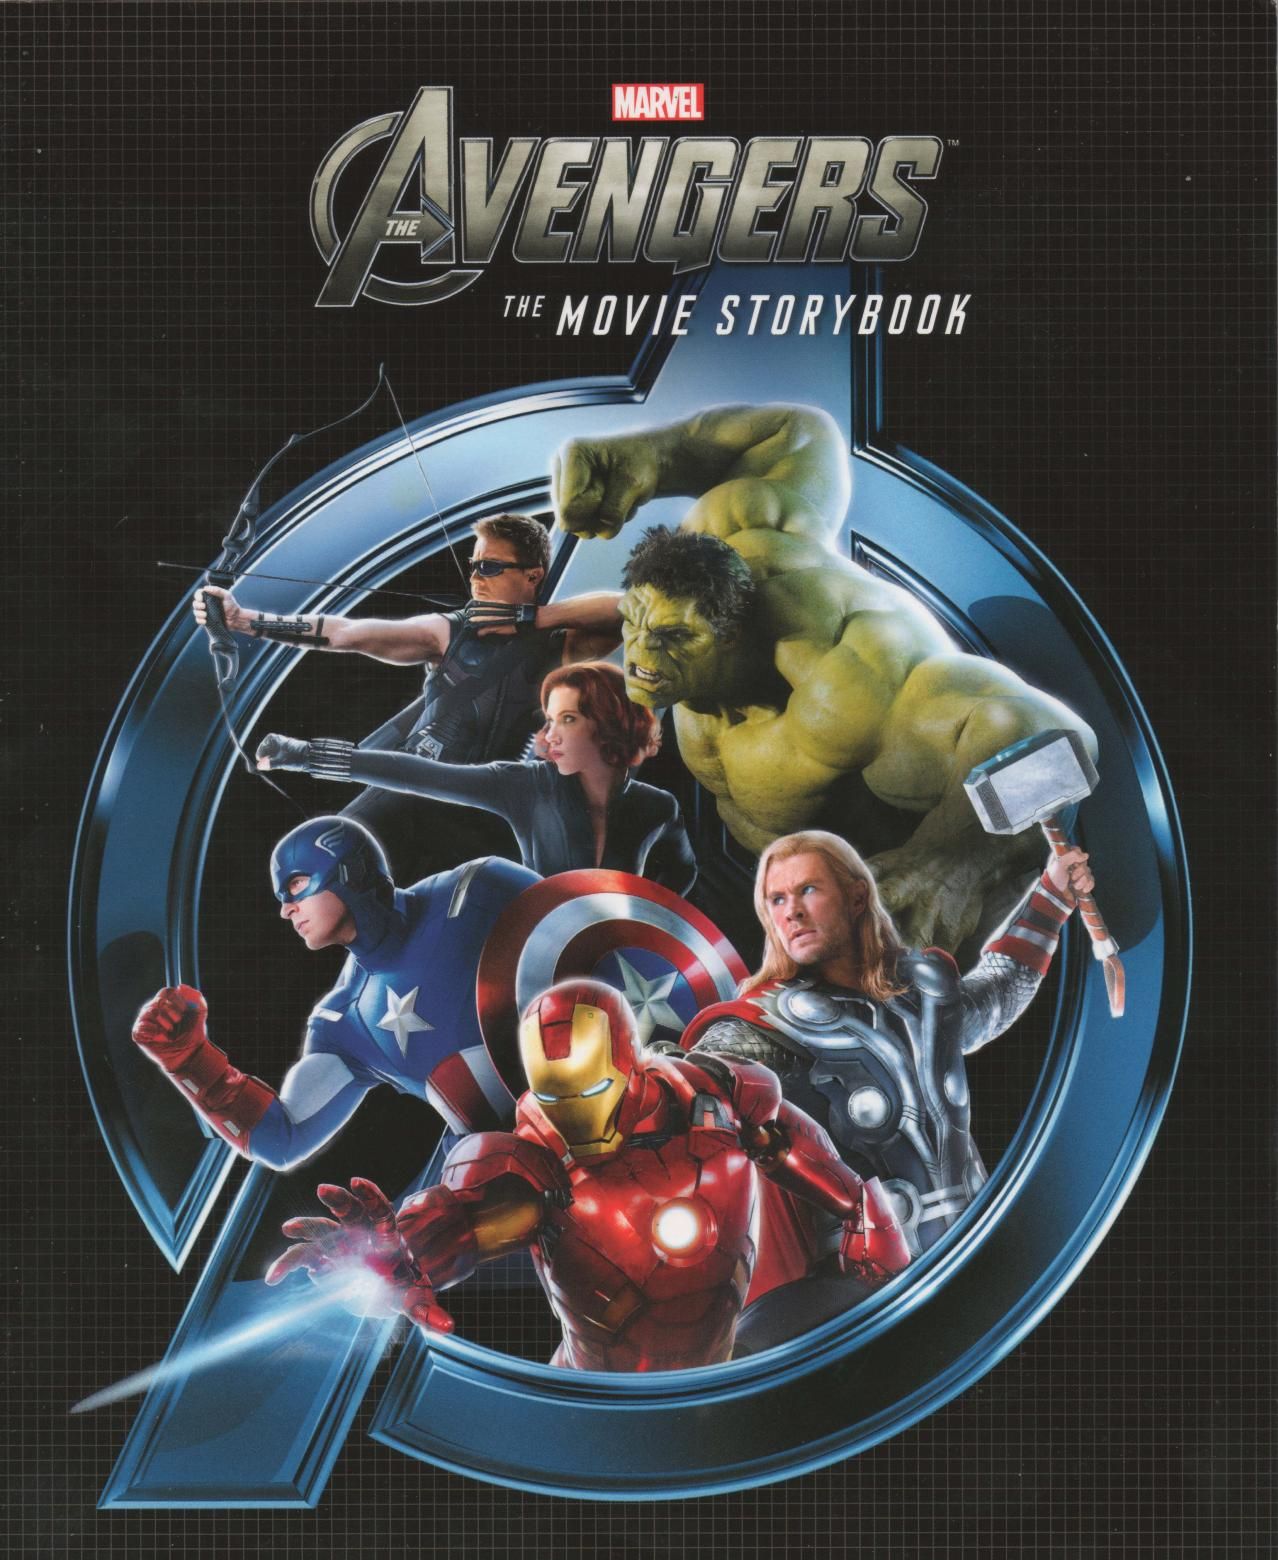 The Avengers Storybook #1